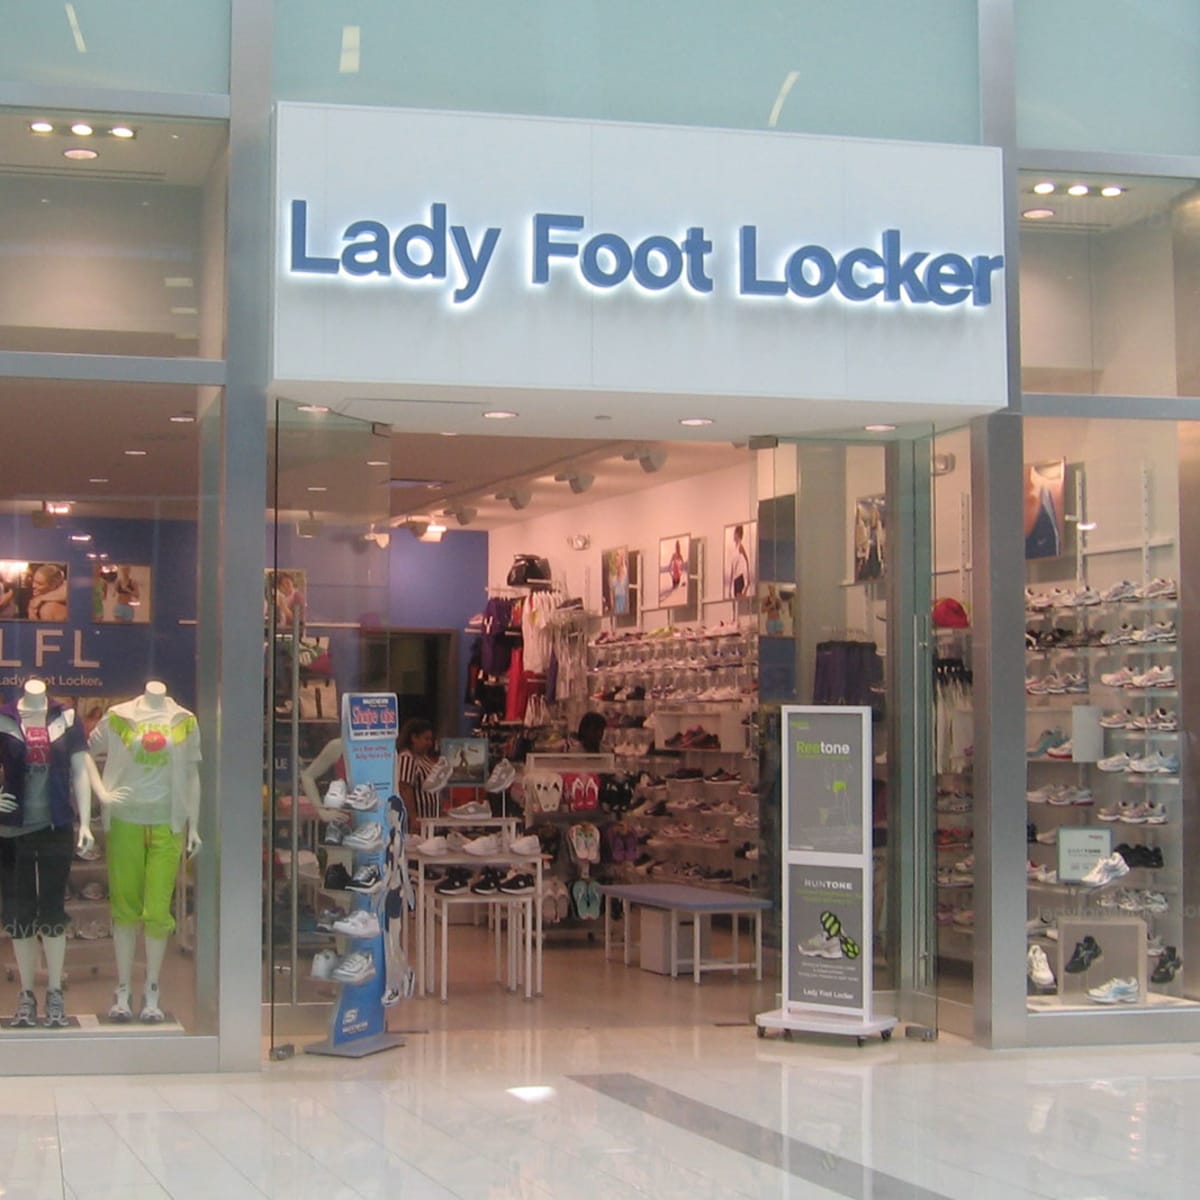 Lady Foot Locker Will Disappear Over 